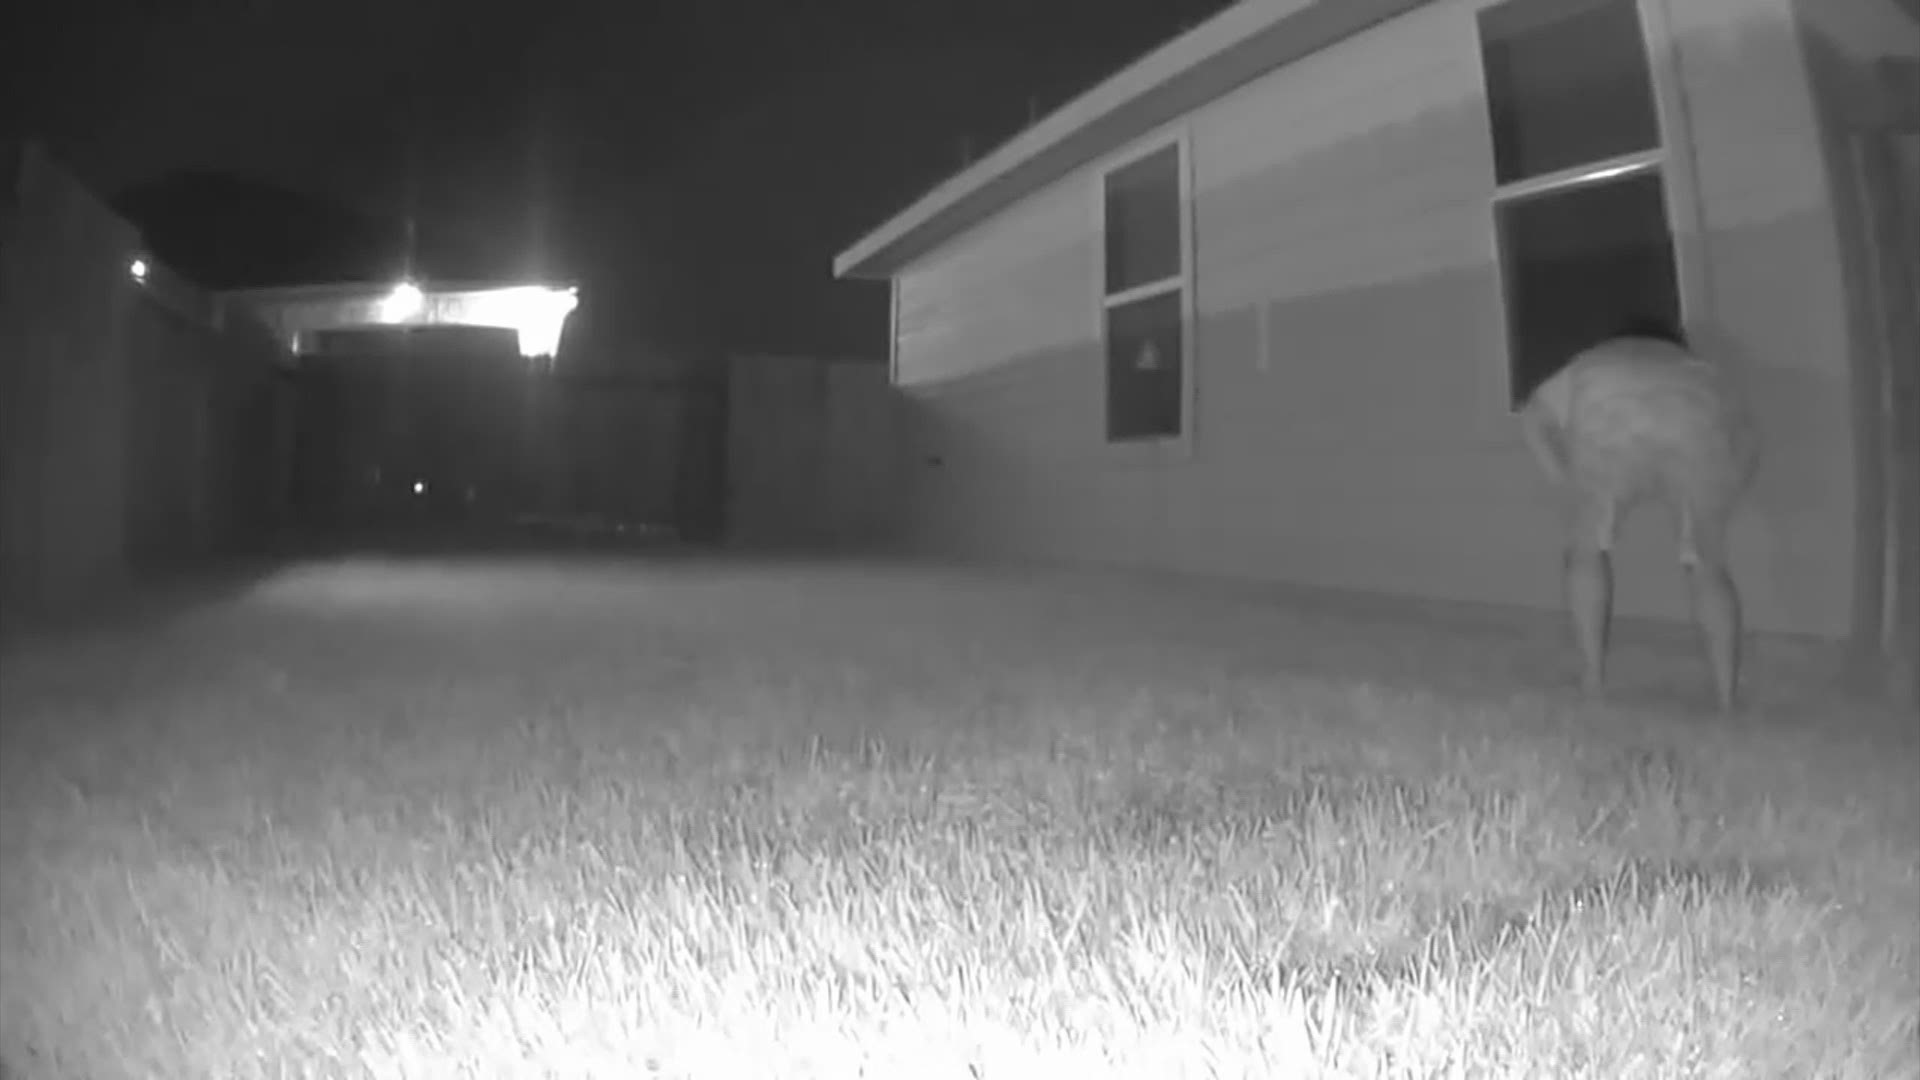 Adriana Garcia said she had a feeling she was being watched, so she installed night vision cameras in her backyard to prove it.